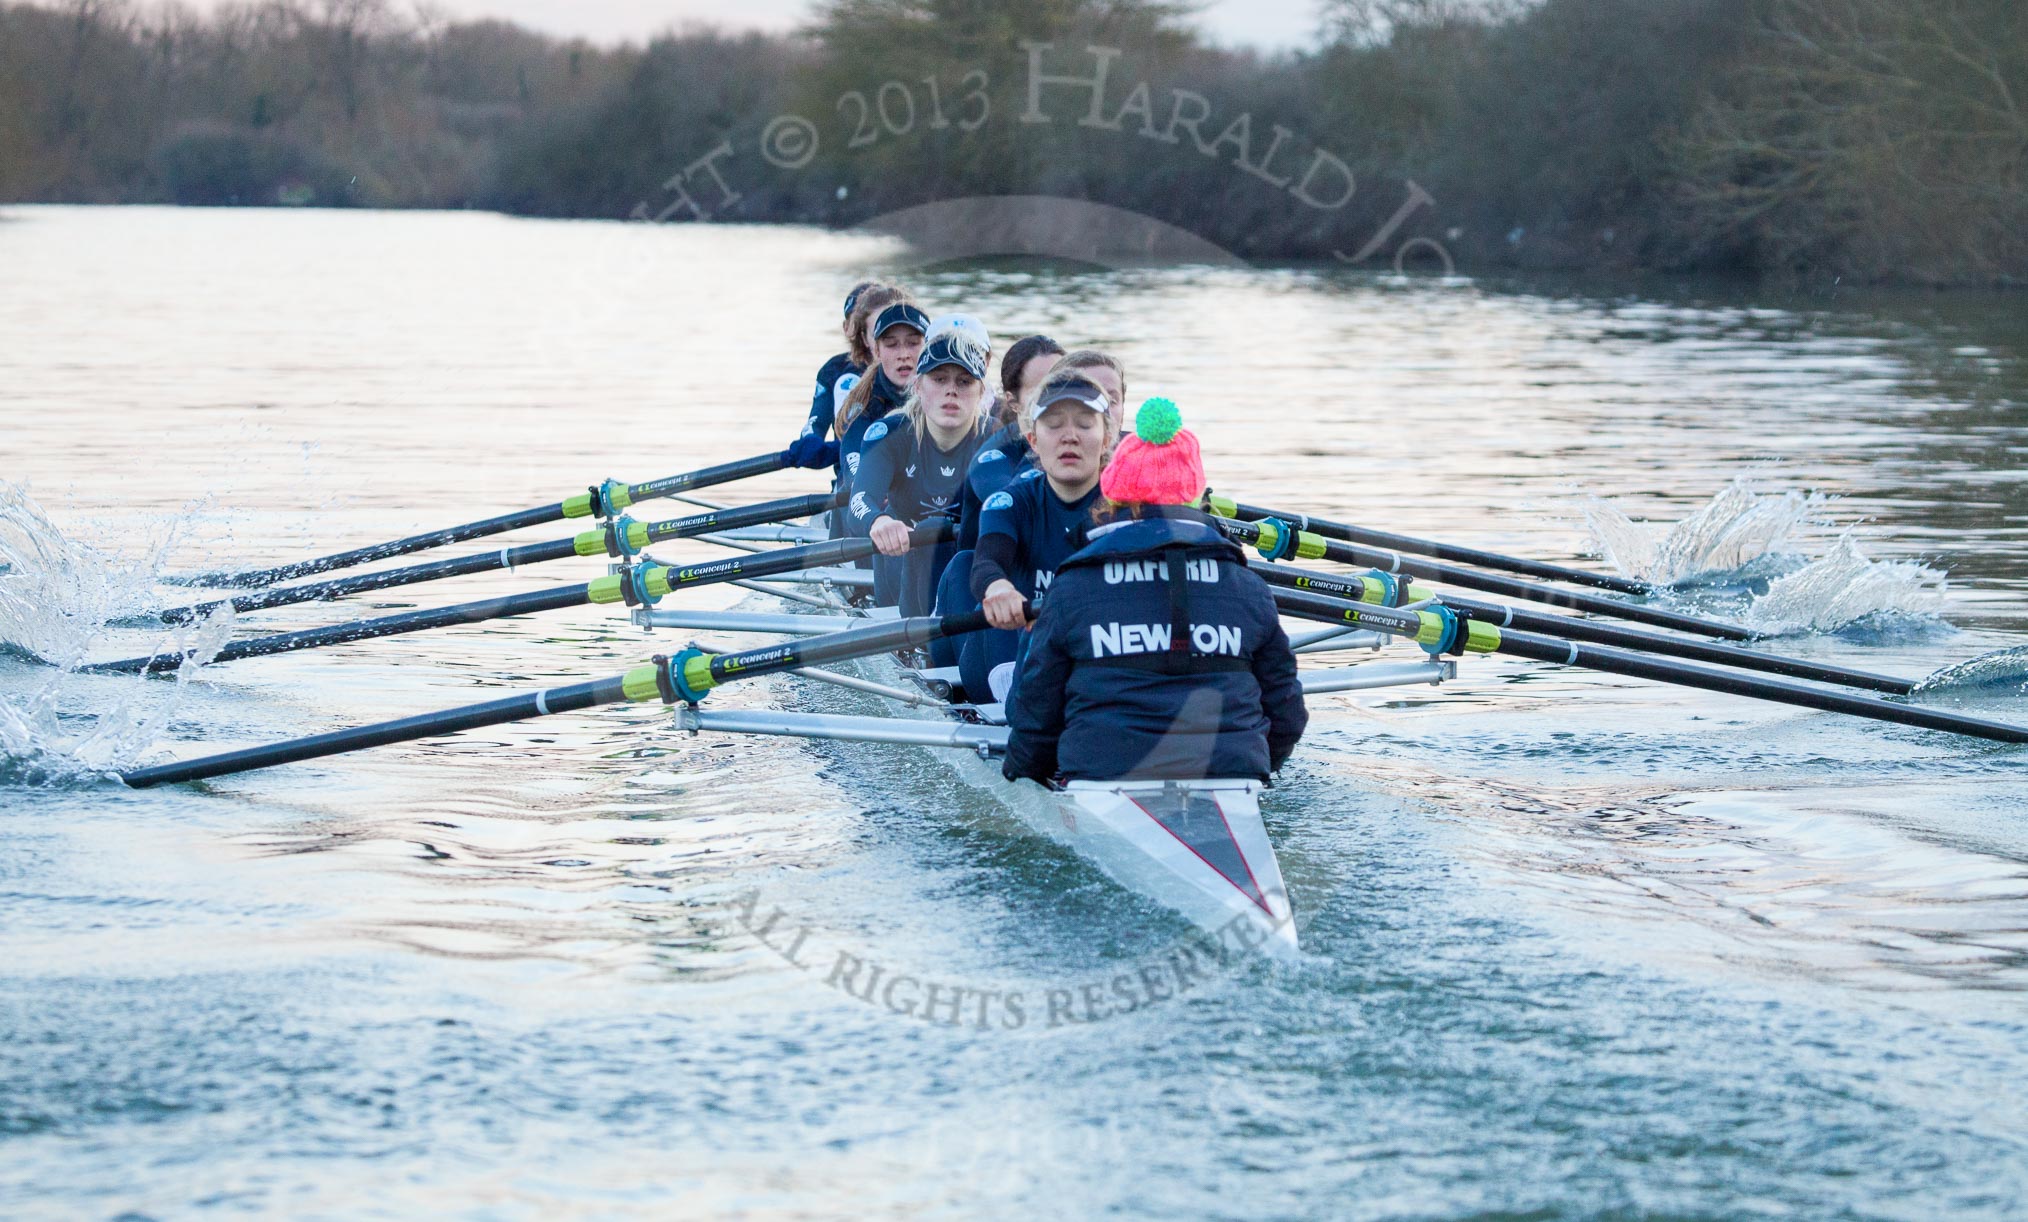 The Boat Race season 2013 - OUWBC training: The OUWBC Blue Boat during the training session - bow Mariann Novak, Alice Carrington-Windo, Mary Foord-Weston, Jo Lee, Amy Varney, Harriet Keane, Anastasia Chitty, stroke Maxie Scheske, and cox Katie Apfelbaum..
River Thames,
Wallingford,
Oxfordshire,
United Kingdom,
on 13 March 2013 at 17:50, image #186